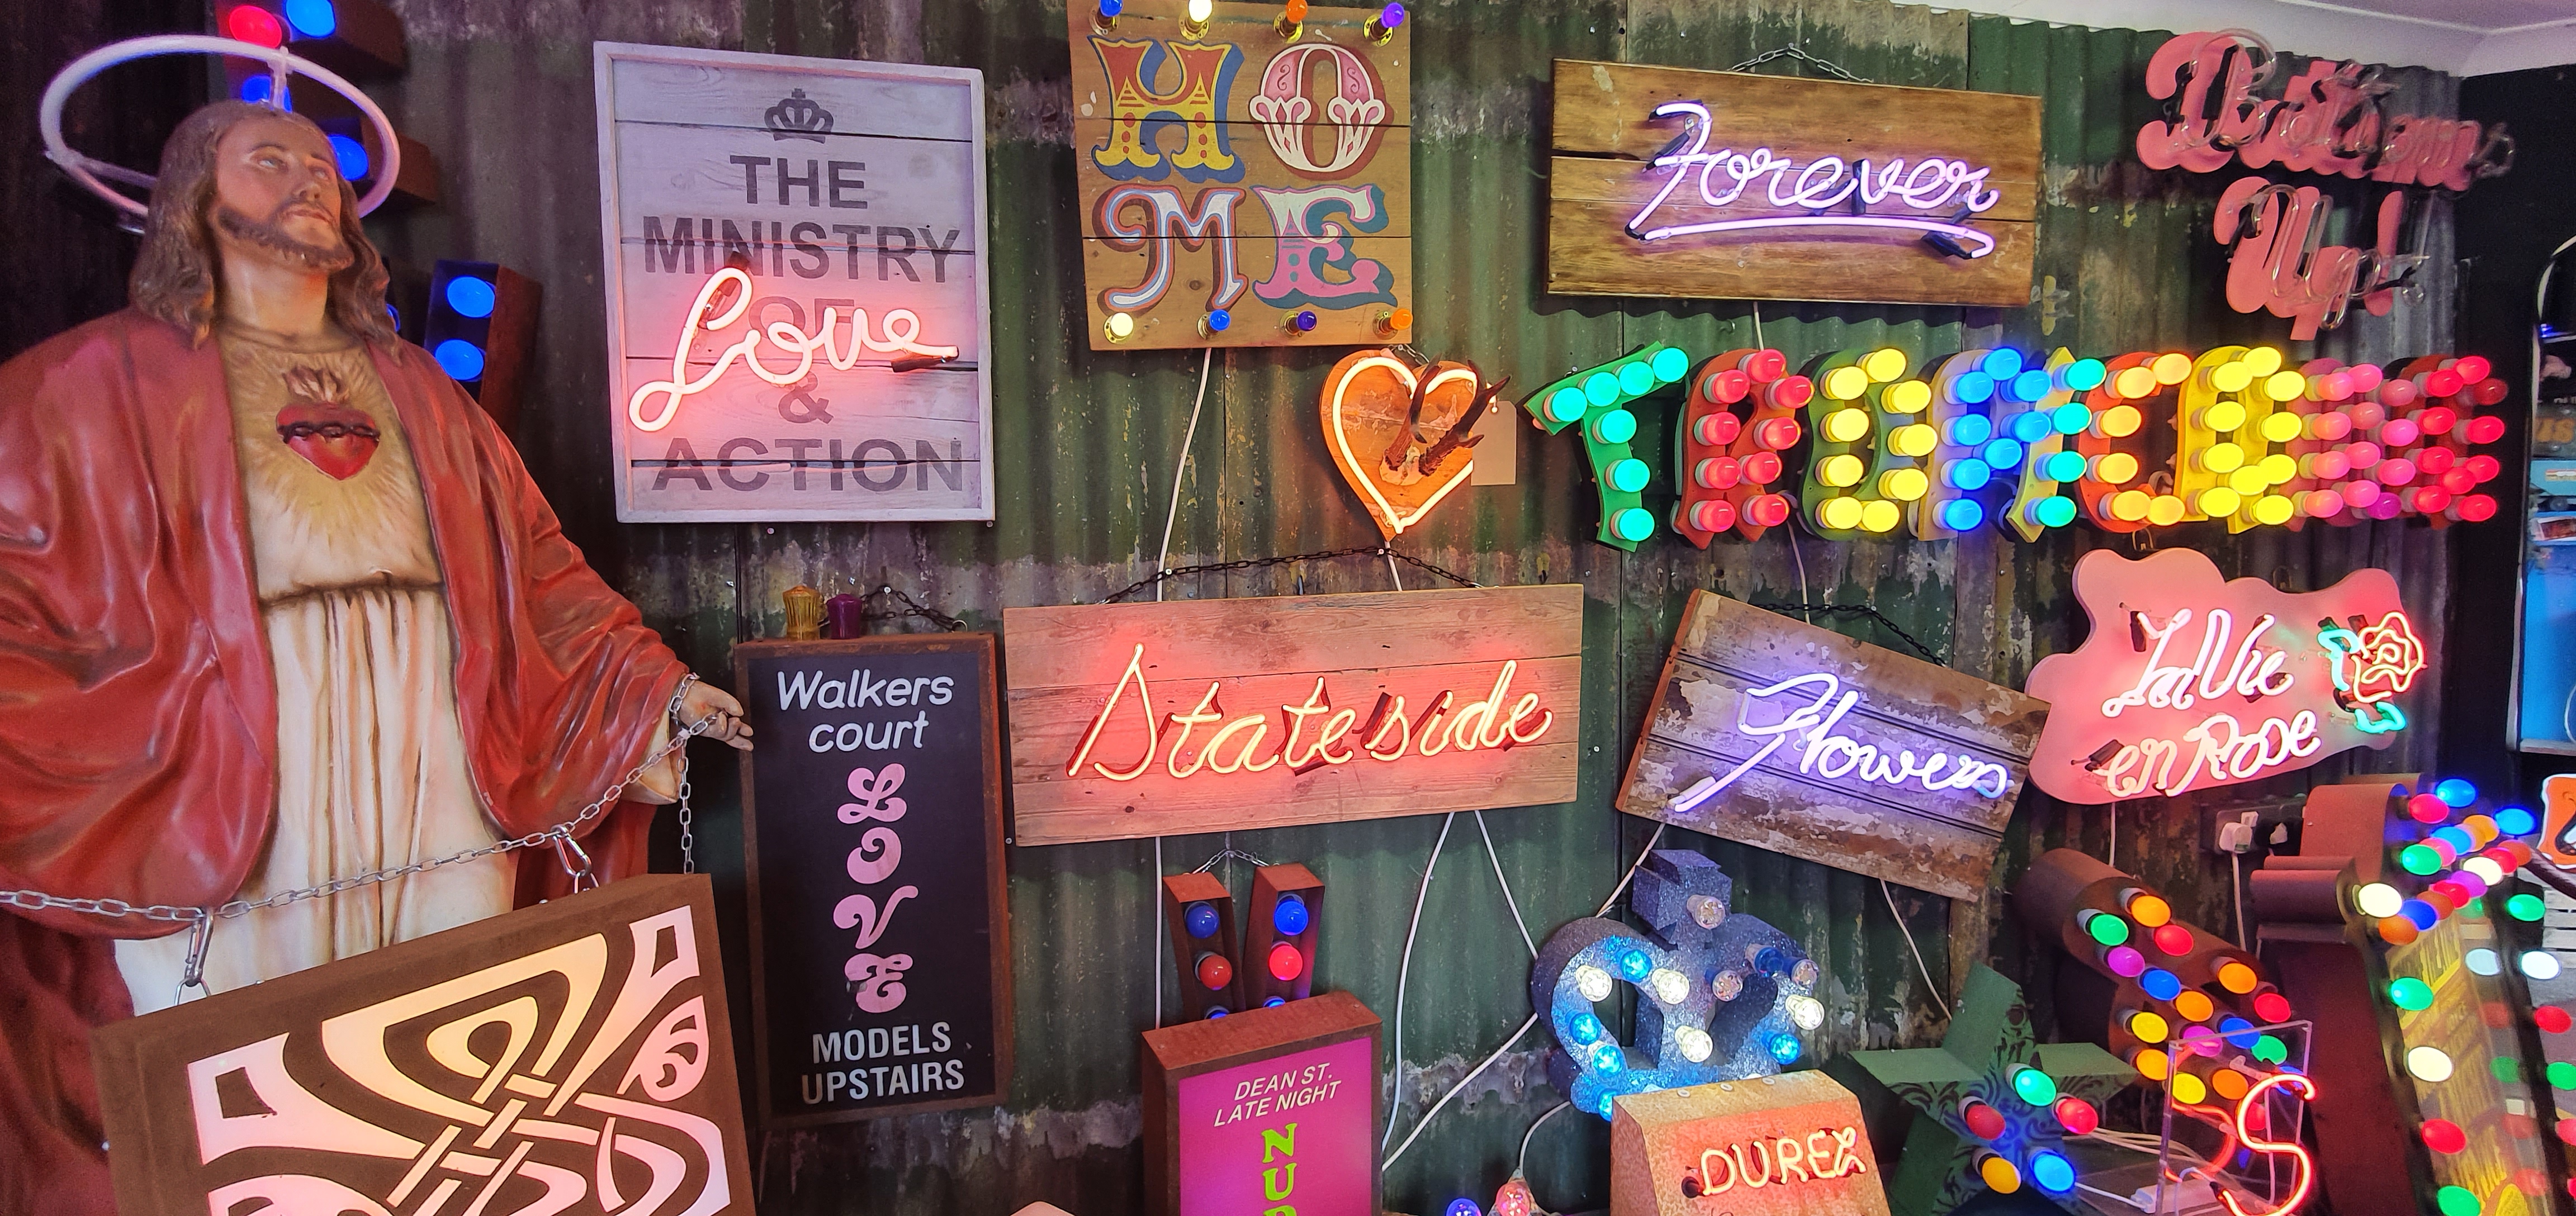 Neon lights and signs at God's Own Junkyard, Walthamstow, London